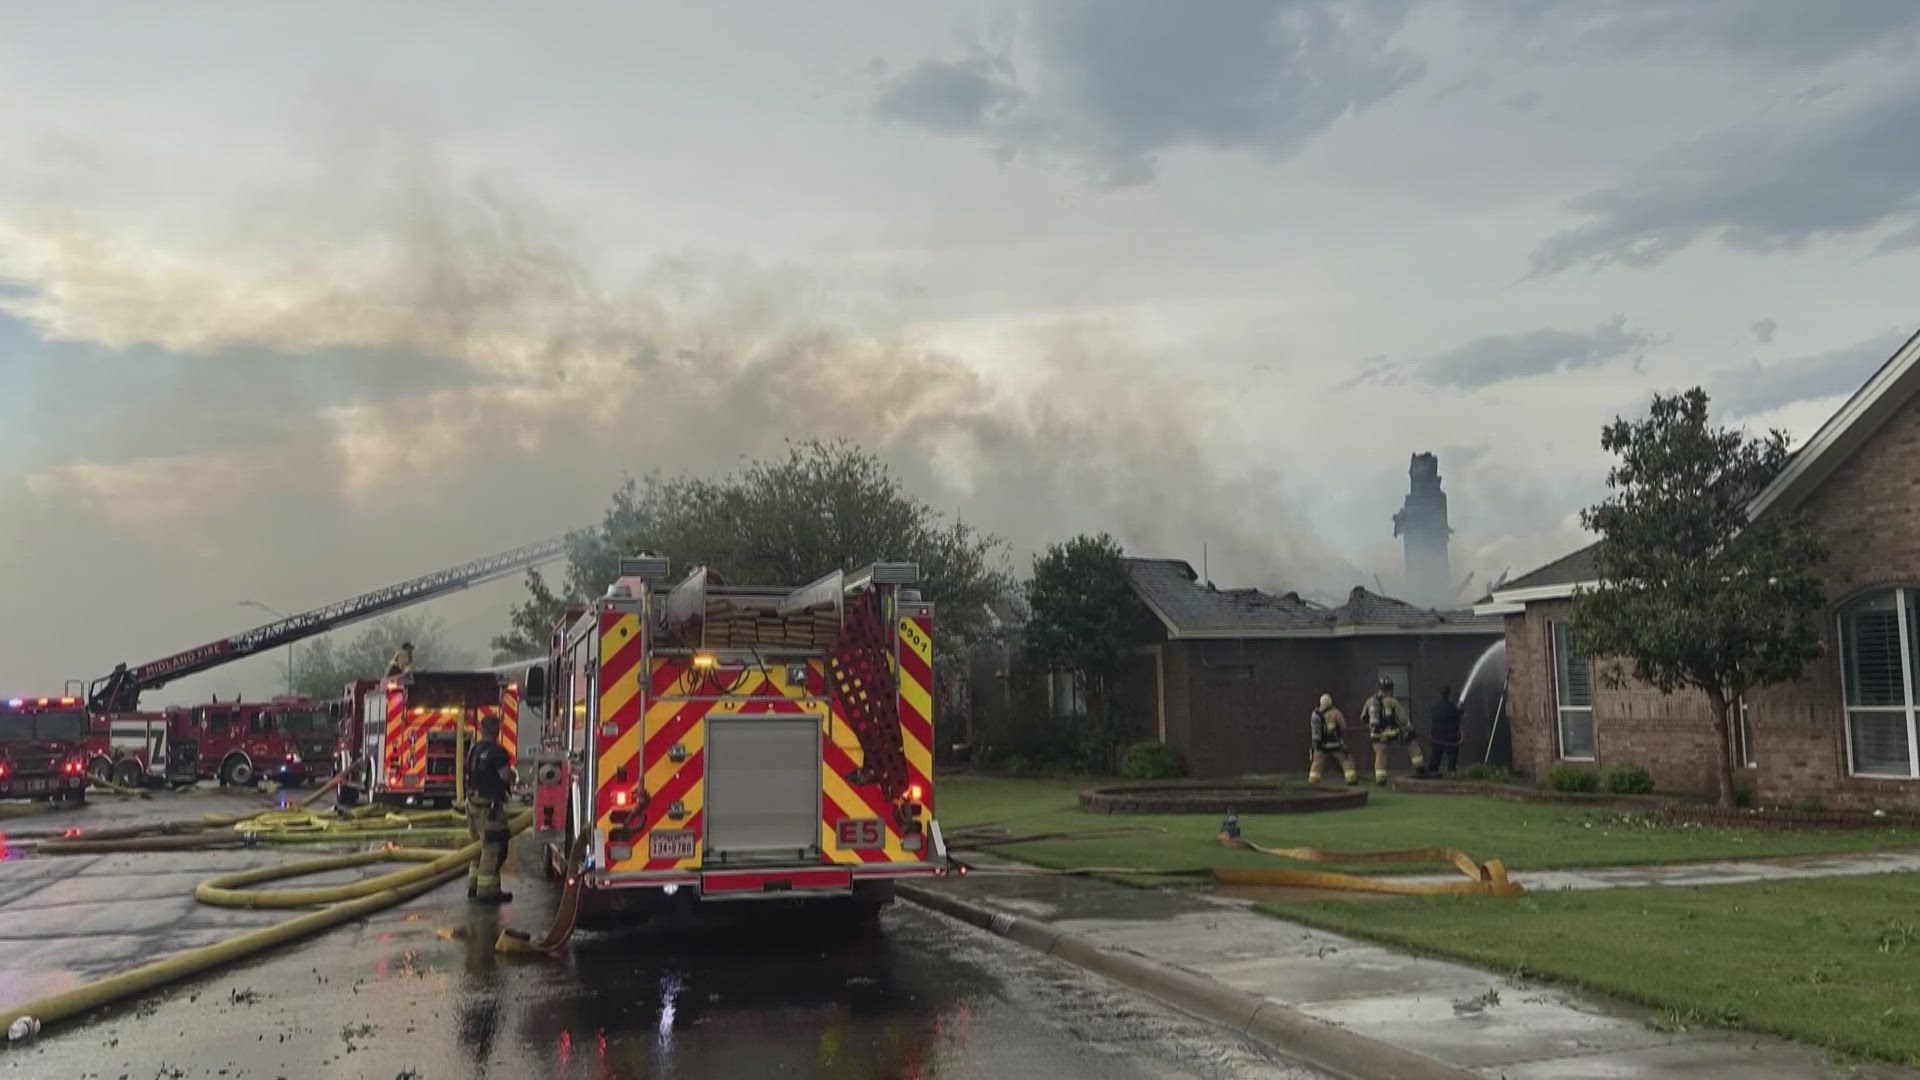 Two houses in Midland caught fire because of lightning. Two vehicles and an RV in Midland got damaged because of a fire.